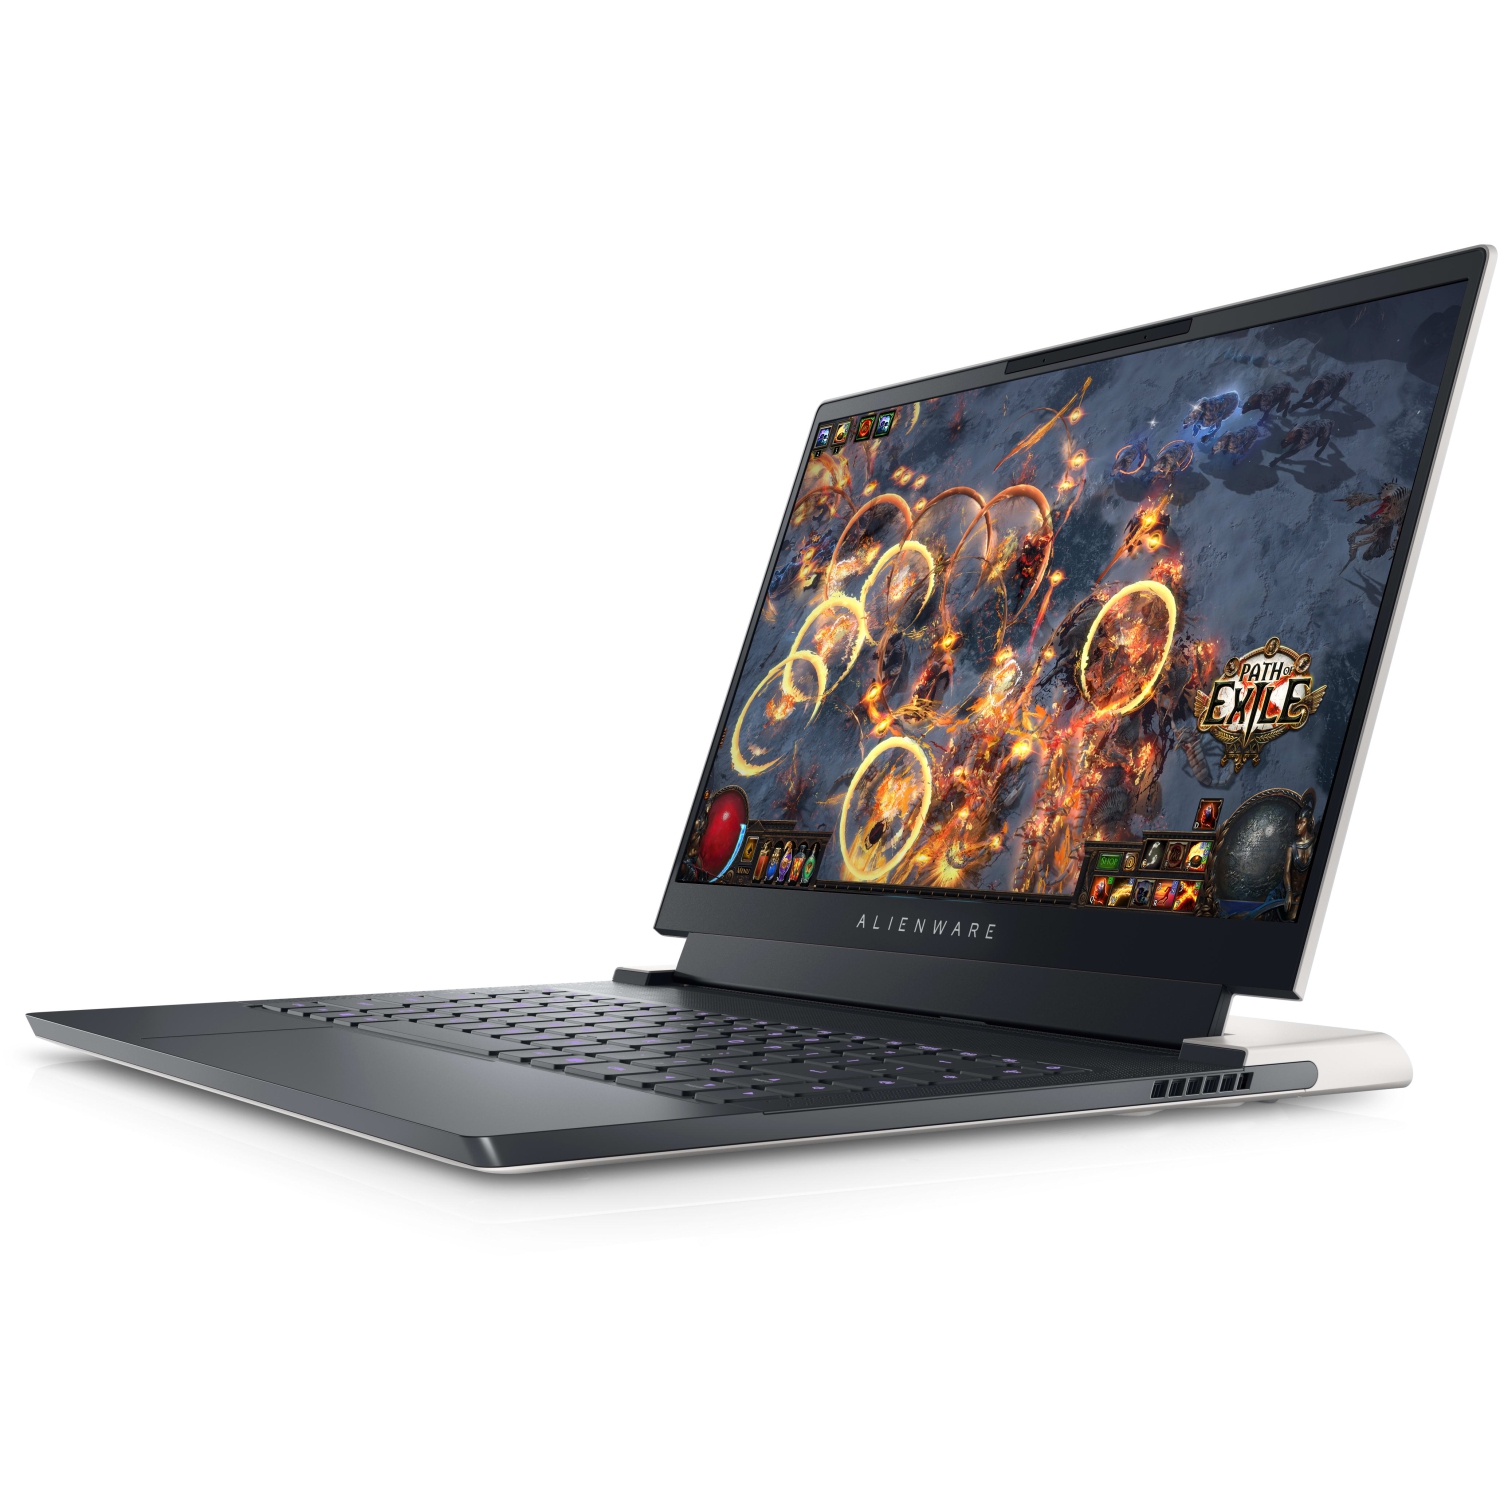 Refurbished (Excellent) – Dell Alienware X14 Gaming Laptop (2022) | 14" FHD | Core i7 - 1TB SSD - 16GB RAM - RTX 3060 | 14 Cores @ 4.7 GHz - 12th Gen CPU - 6GB GDDR6